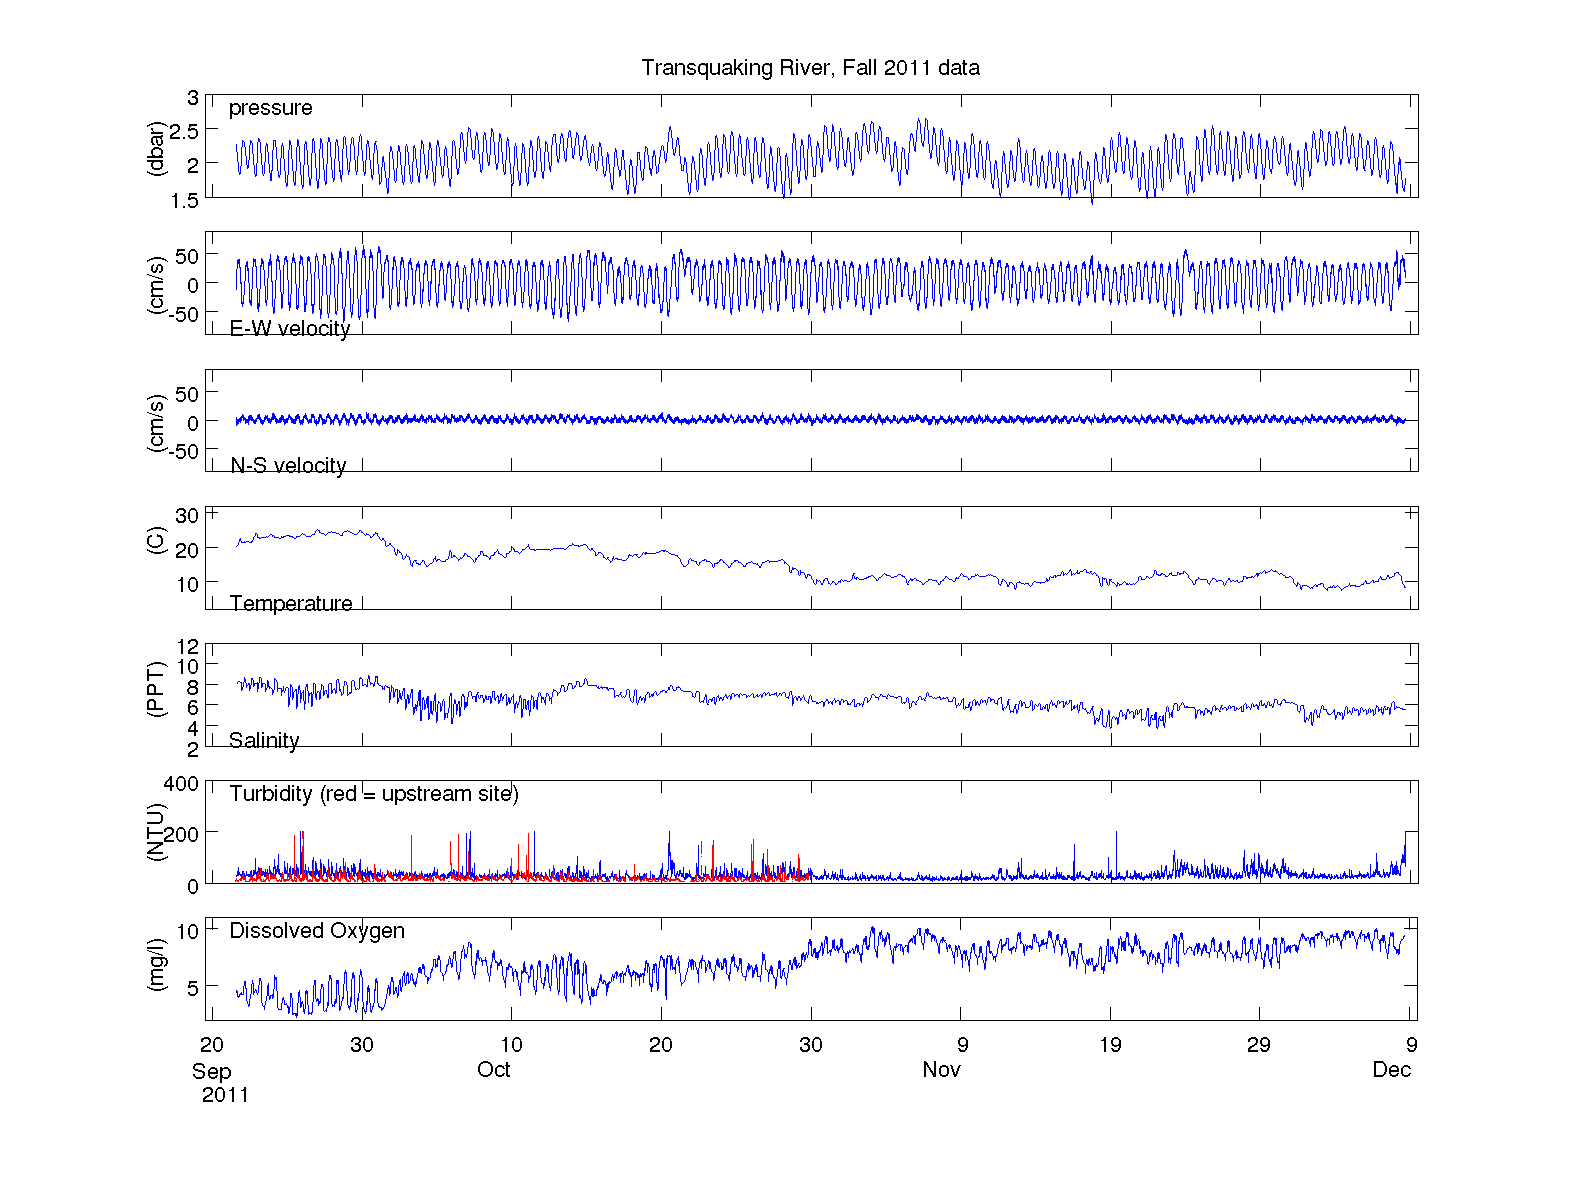 Figure 15.  Fall 2011 data from Transquaking River (916,918).